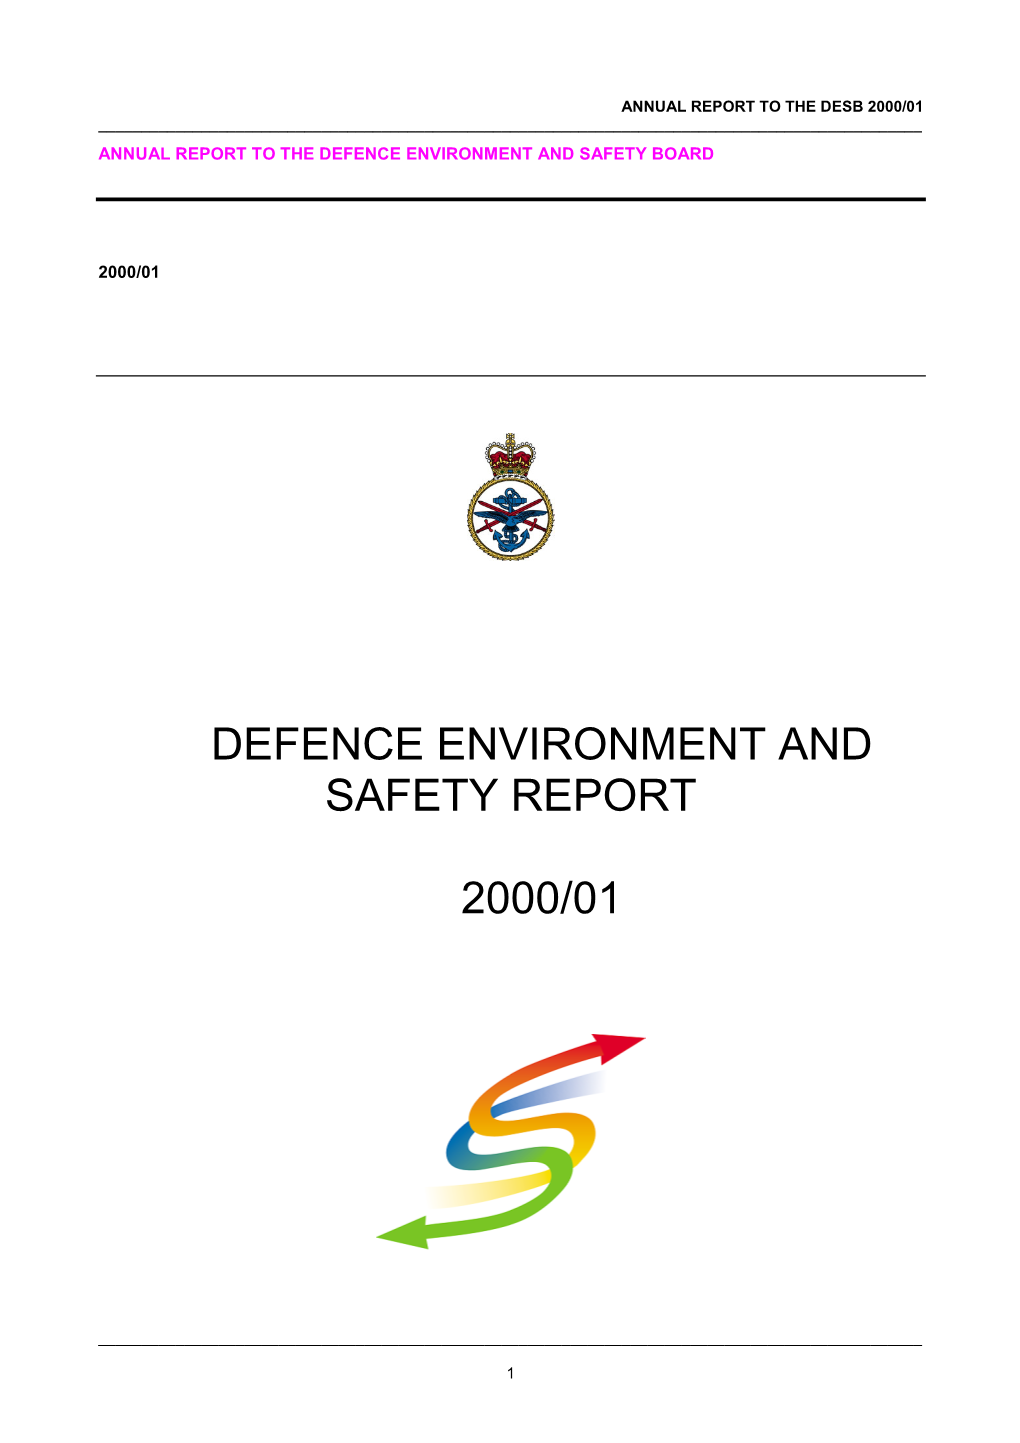 Defence Environment and Safety Report 2000 to 2001